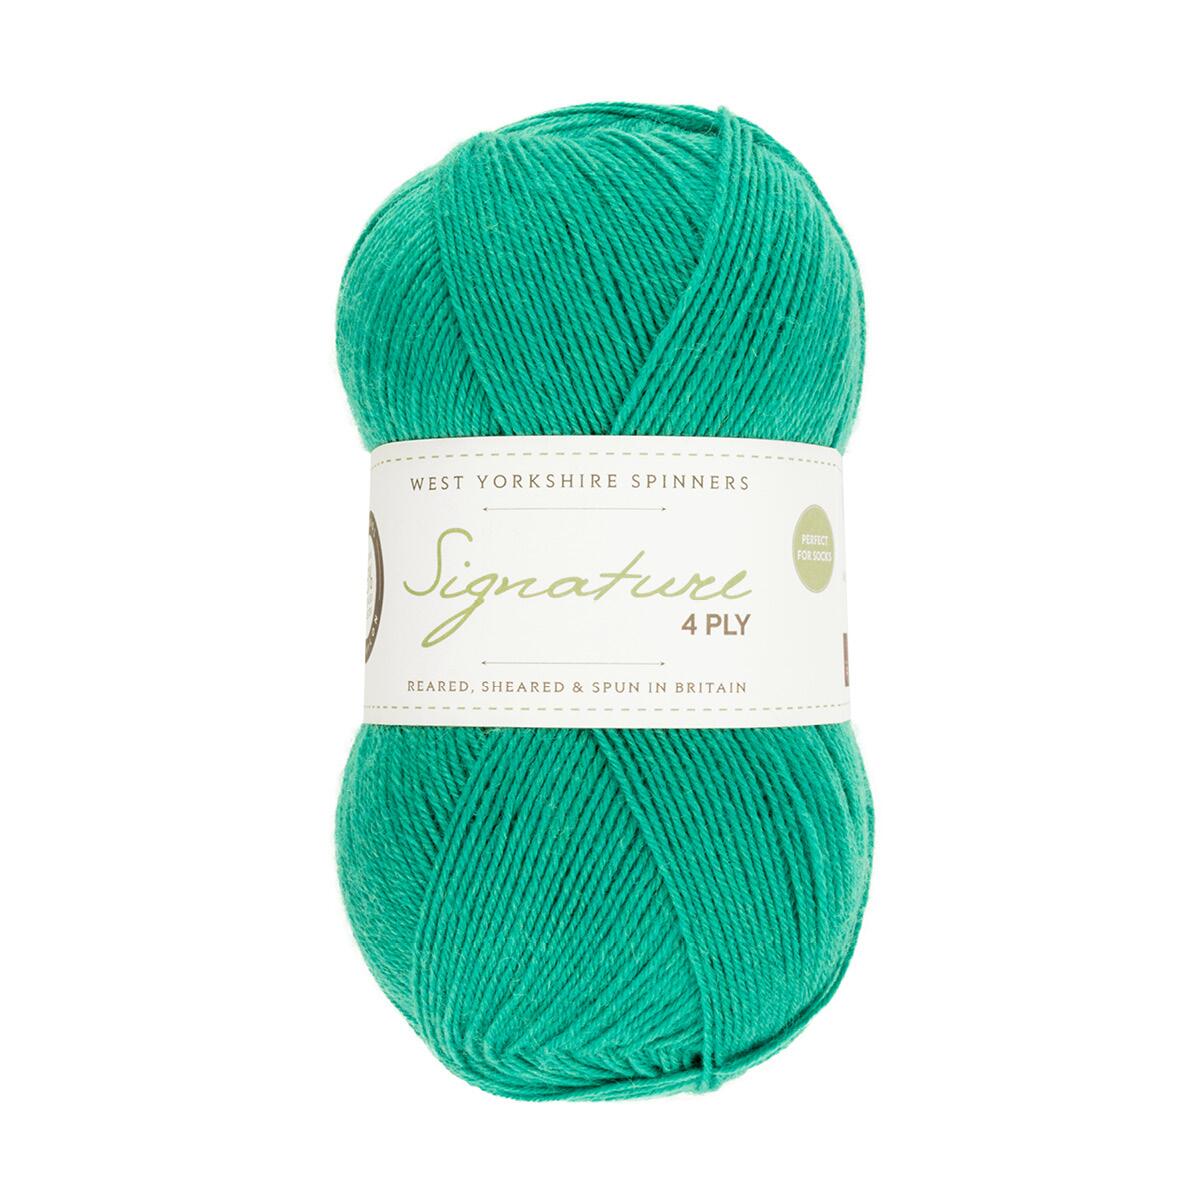 West Yorkshire Spinners Signature 4ply Unis 100g Farbe: 333 Blue Raspberry